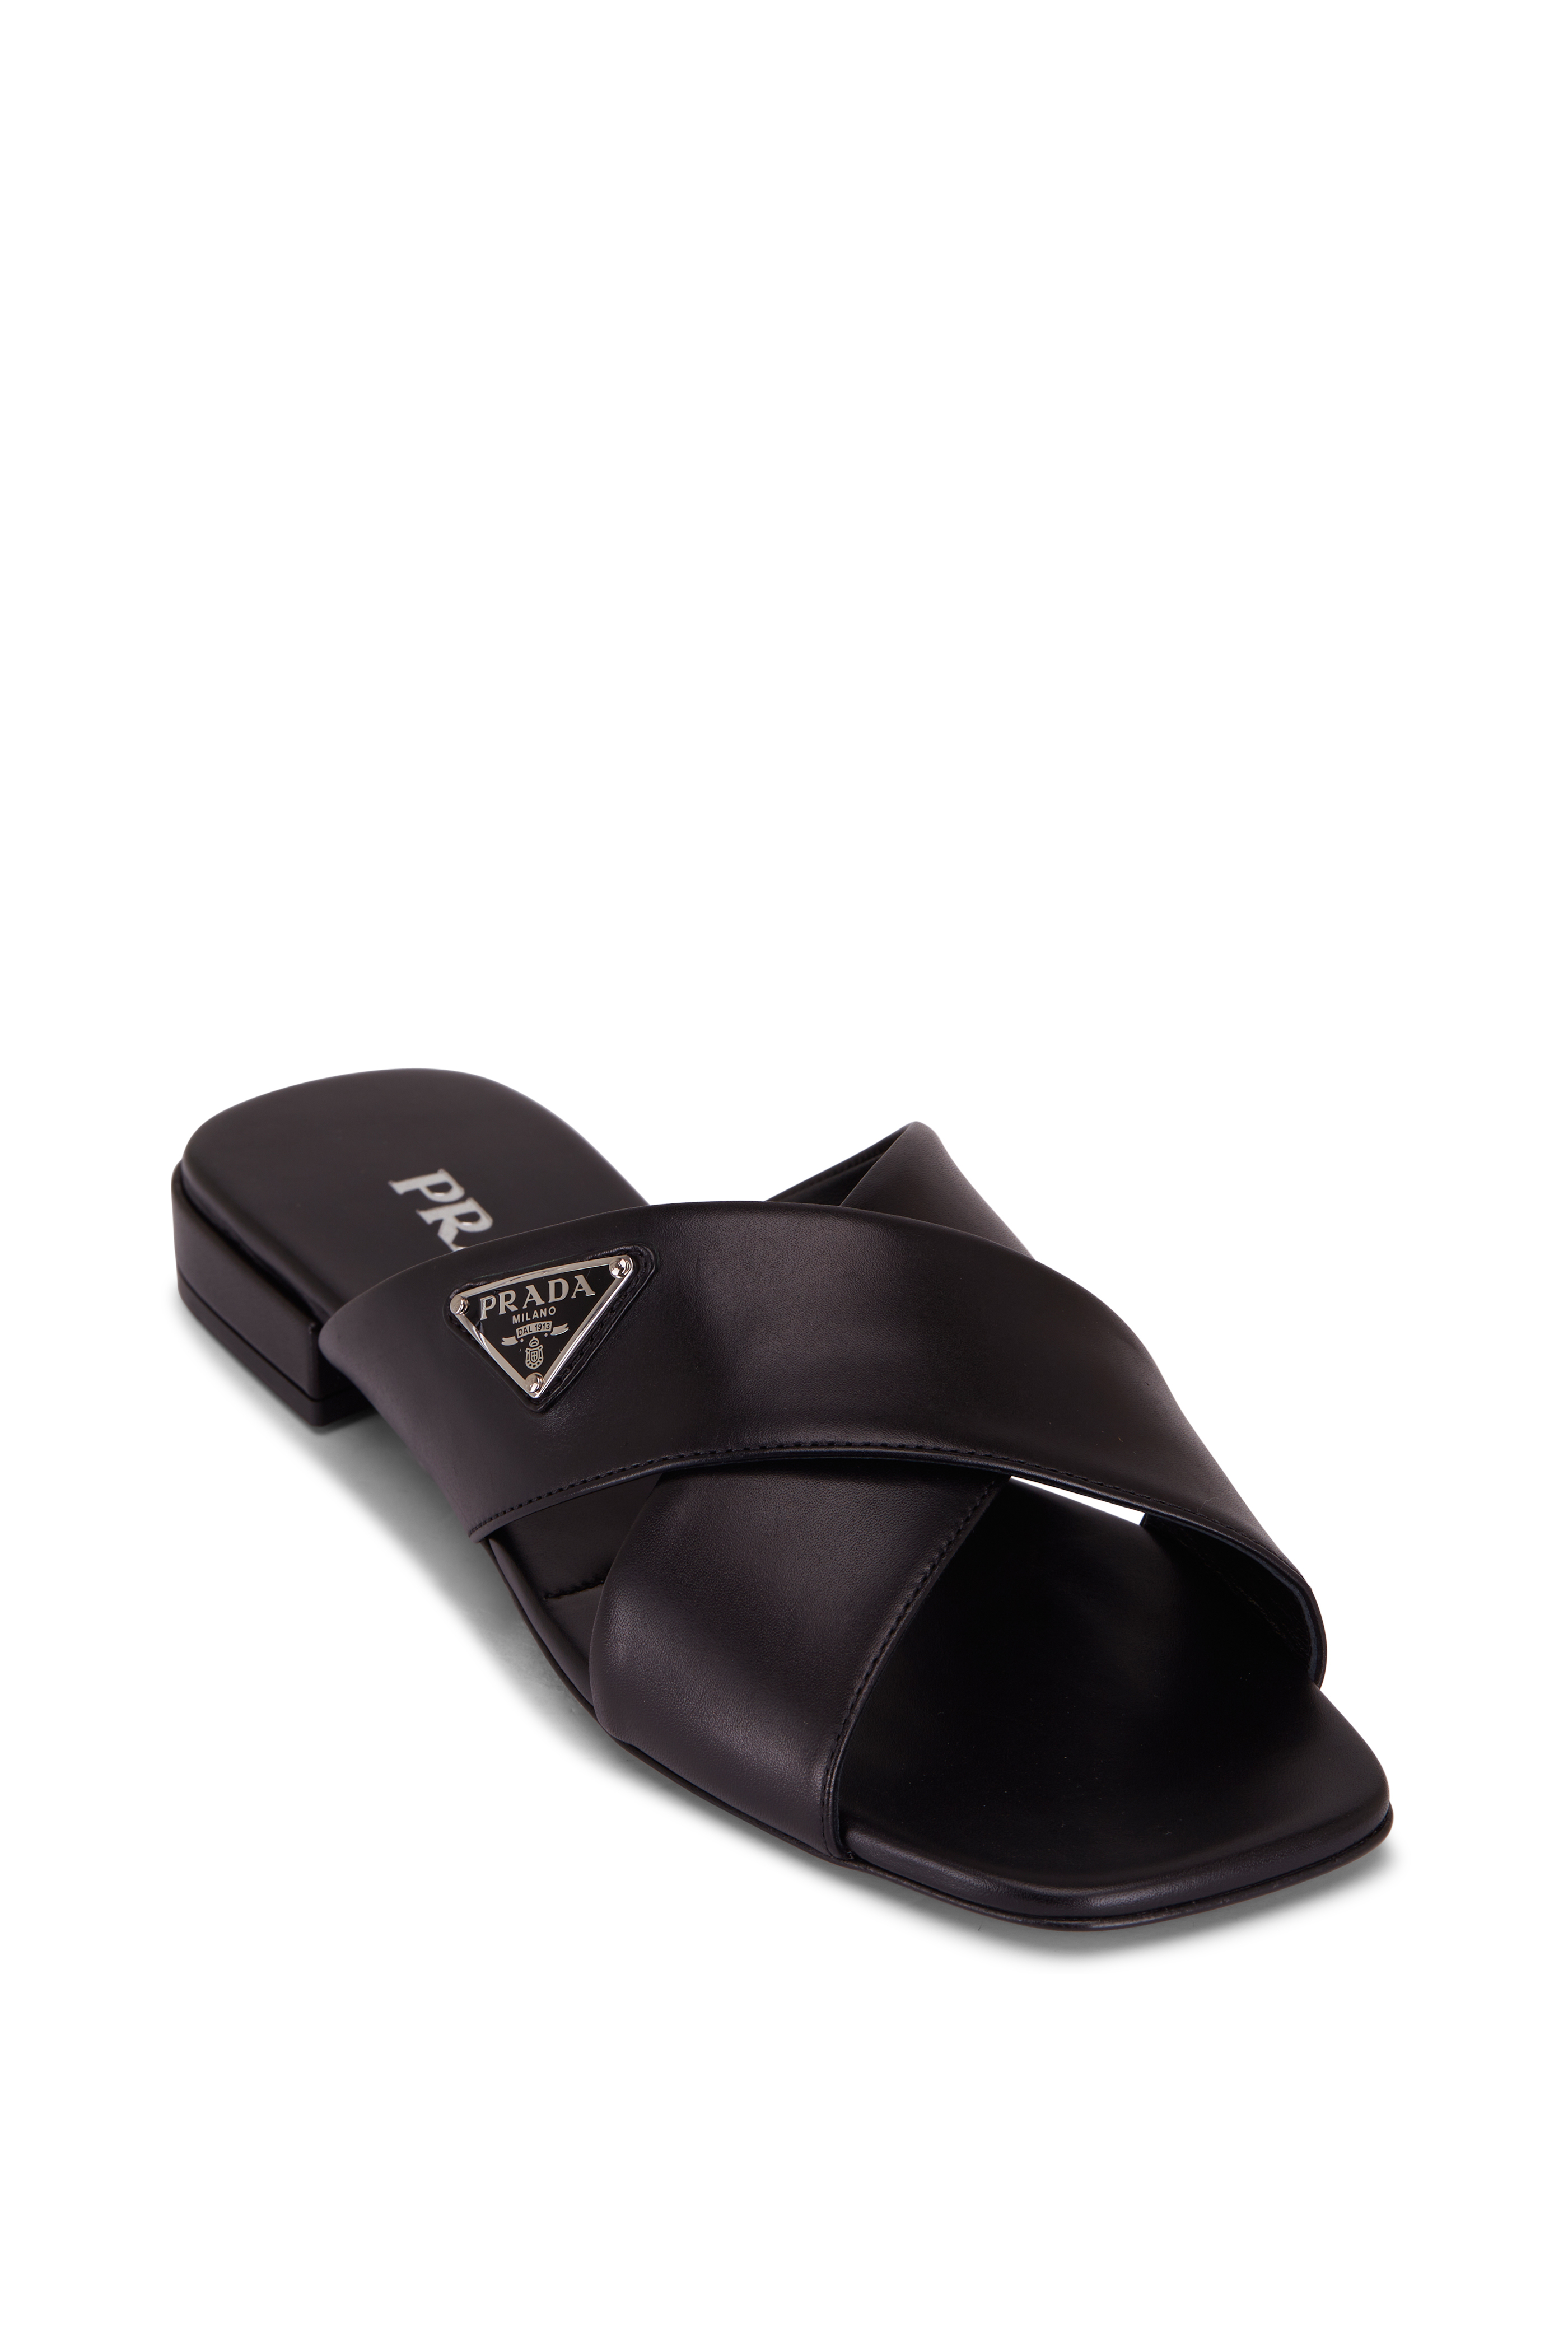 Prada Women's Black Quilted Nappa Leather Slide, 35mm | 9.5 M by Mitchell Stores